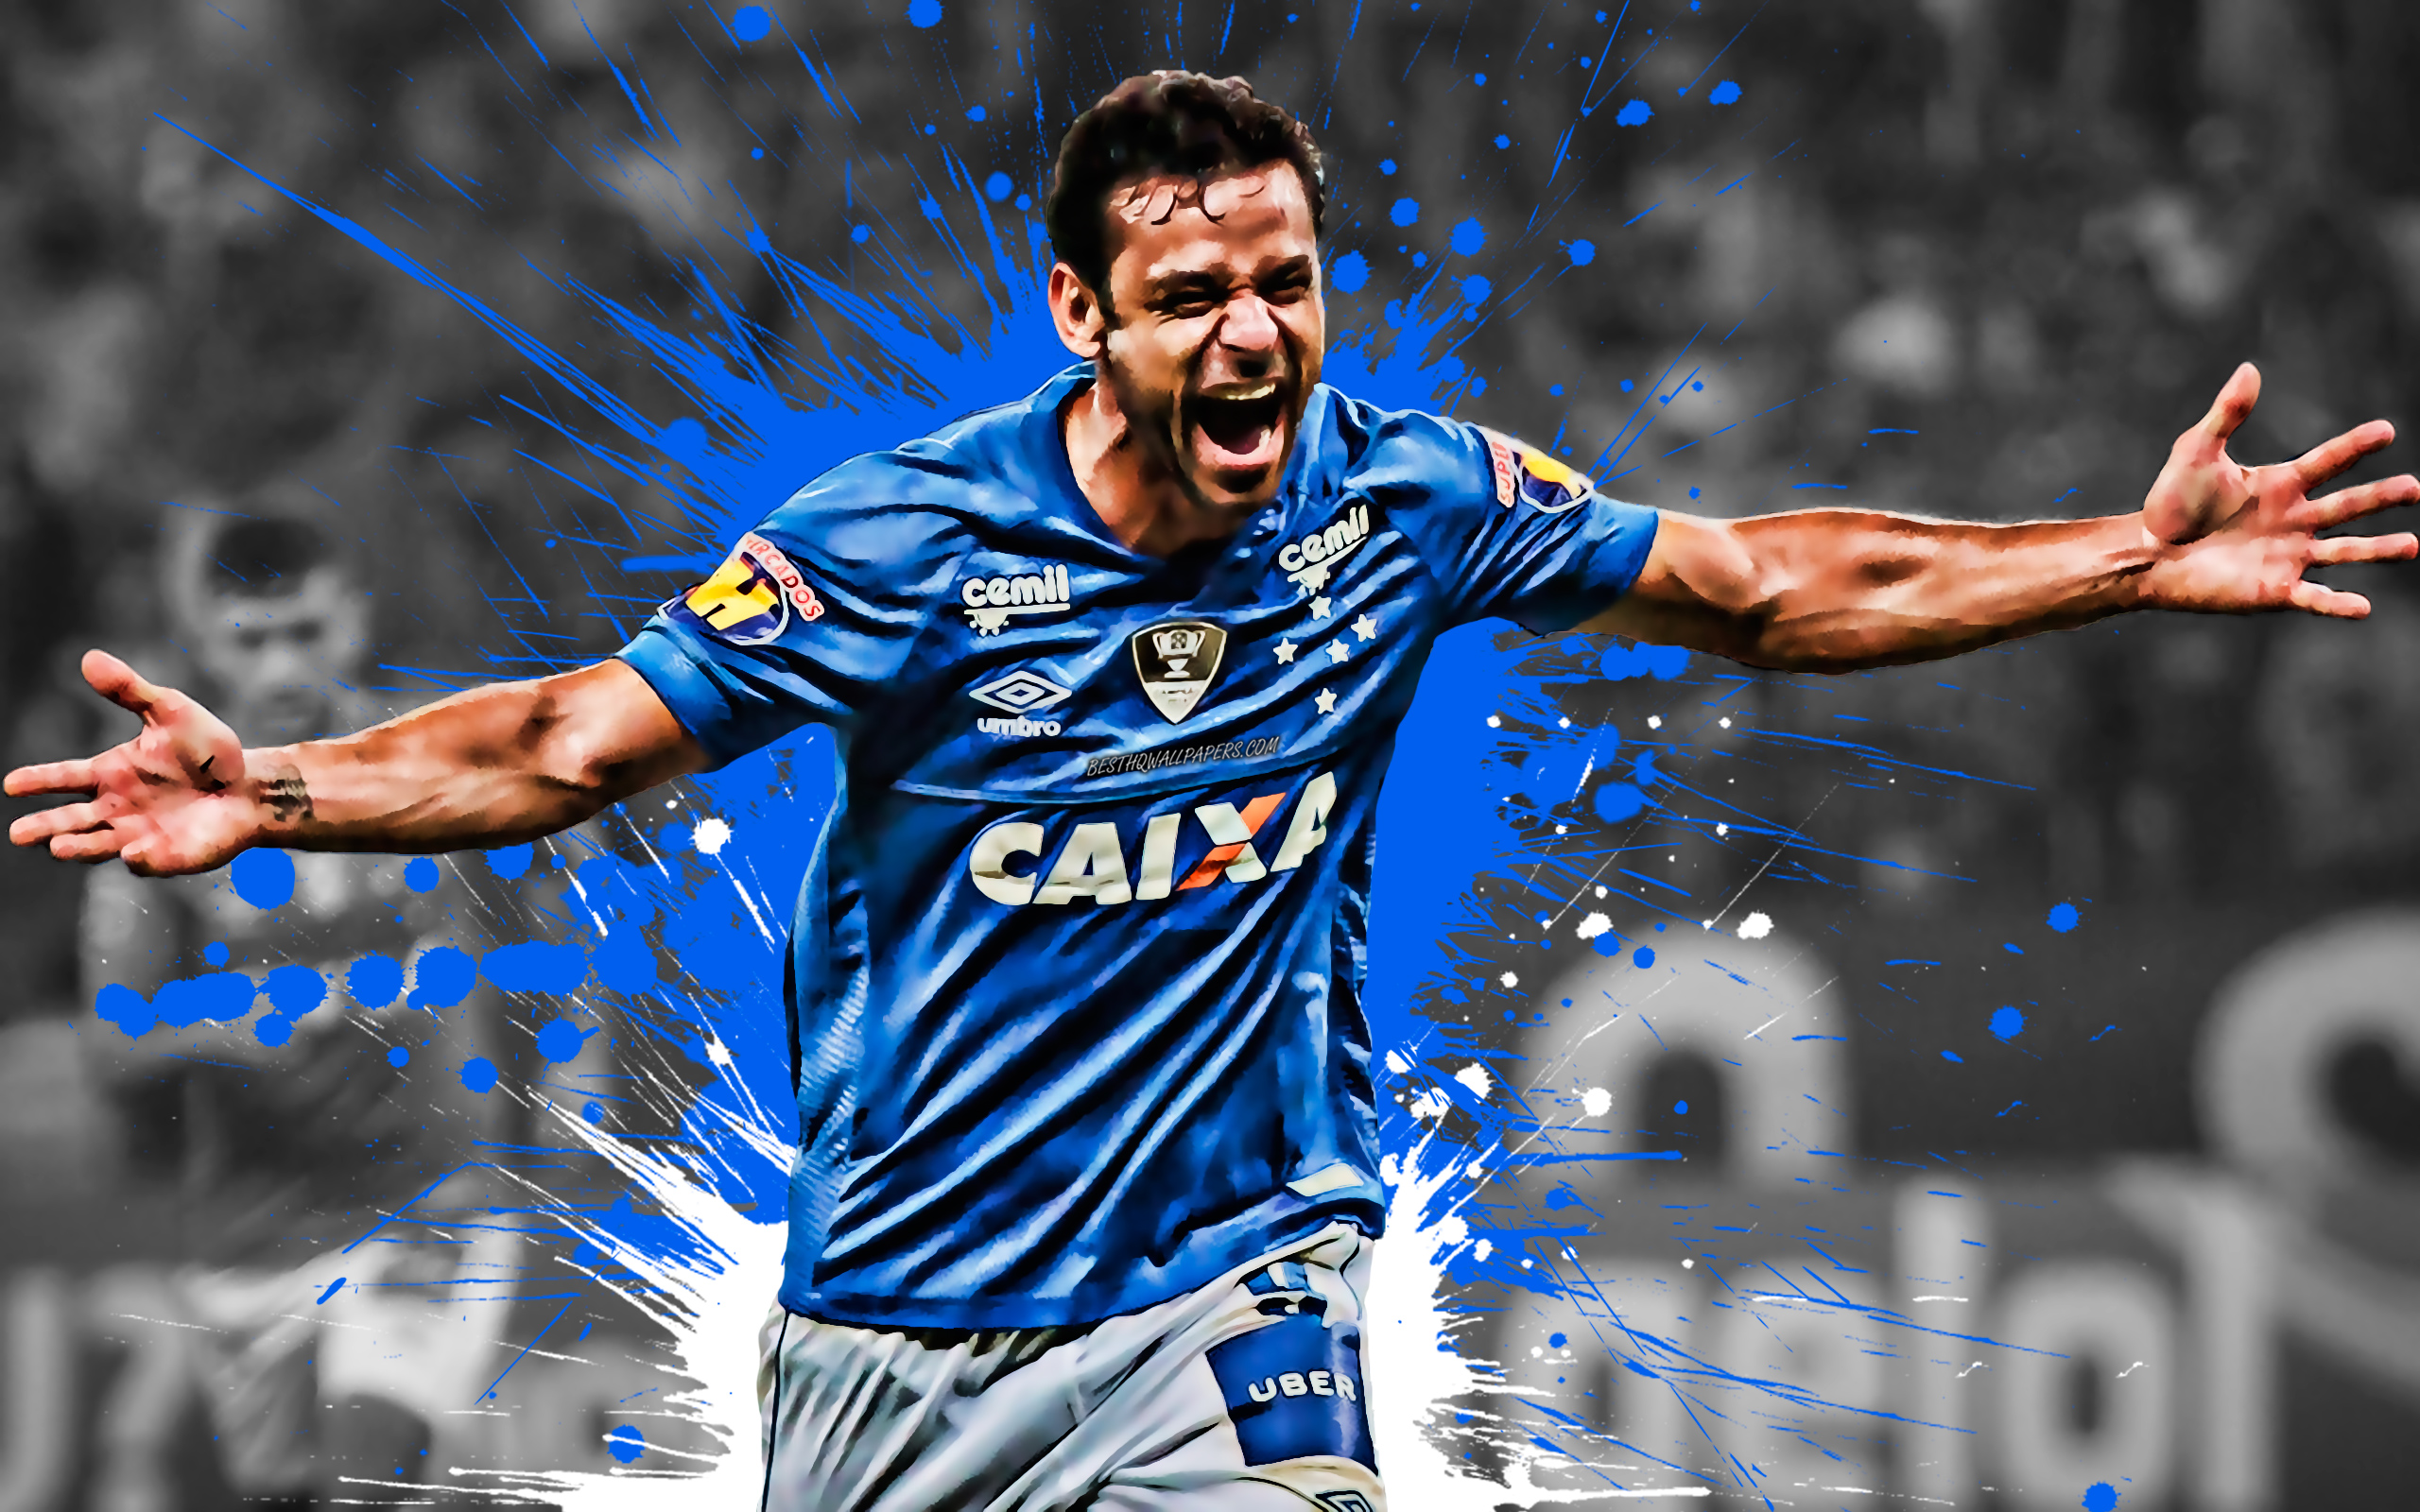 Fred, Frederico Chaves Guedes, 4k, Brazilian Football - Frederico Chaves Guedes Cruzeiro , HD Wallpaper & Backgrounds